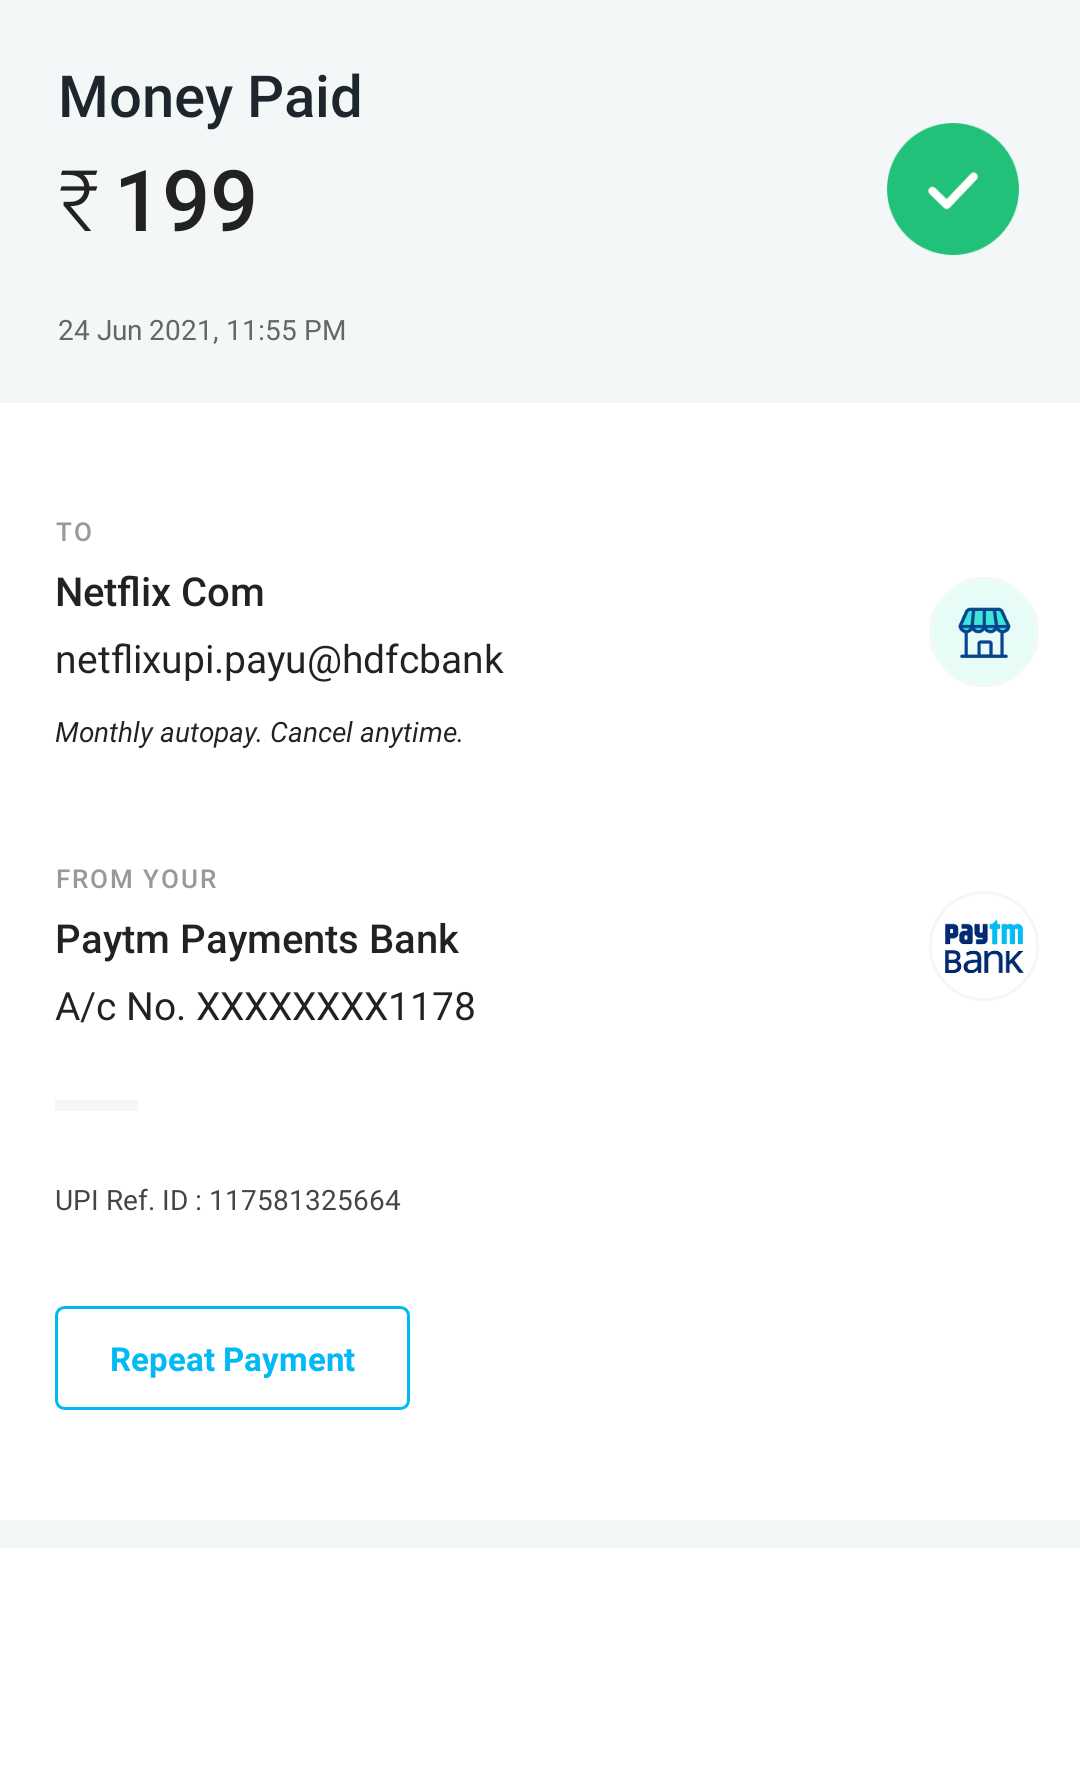 Netflix complaint Amount was deducted but account was not activated